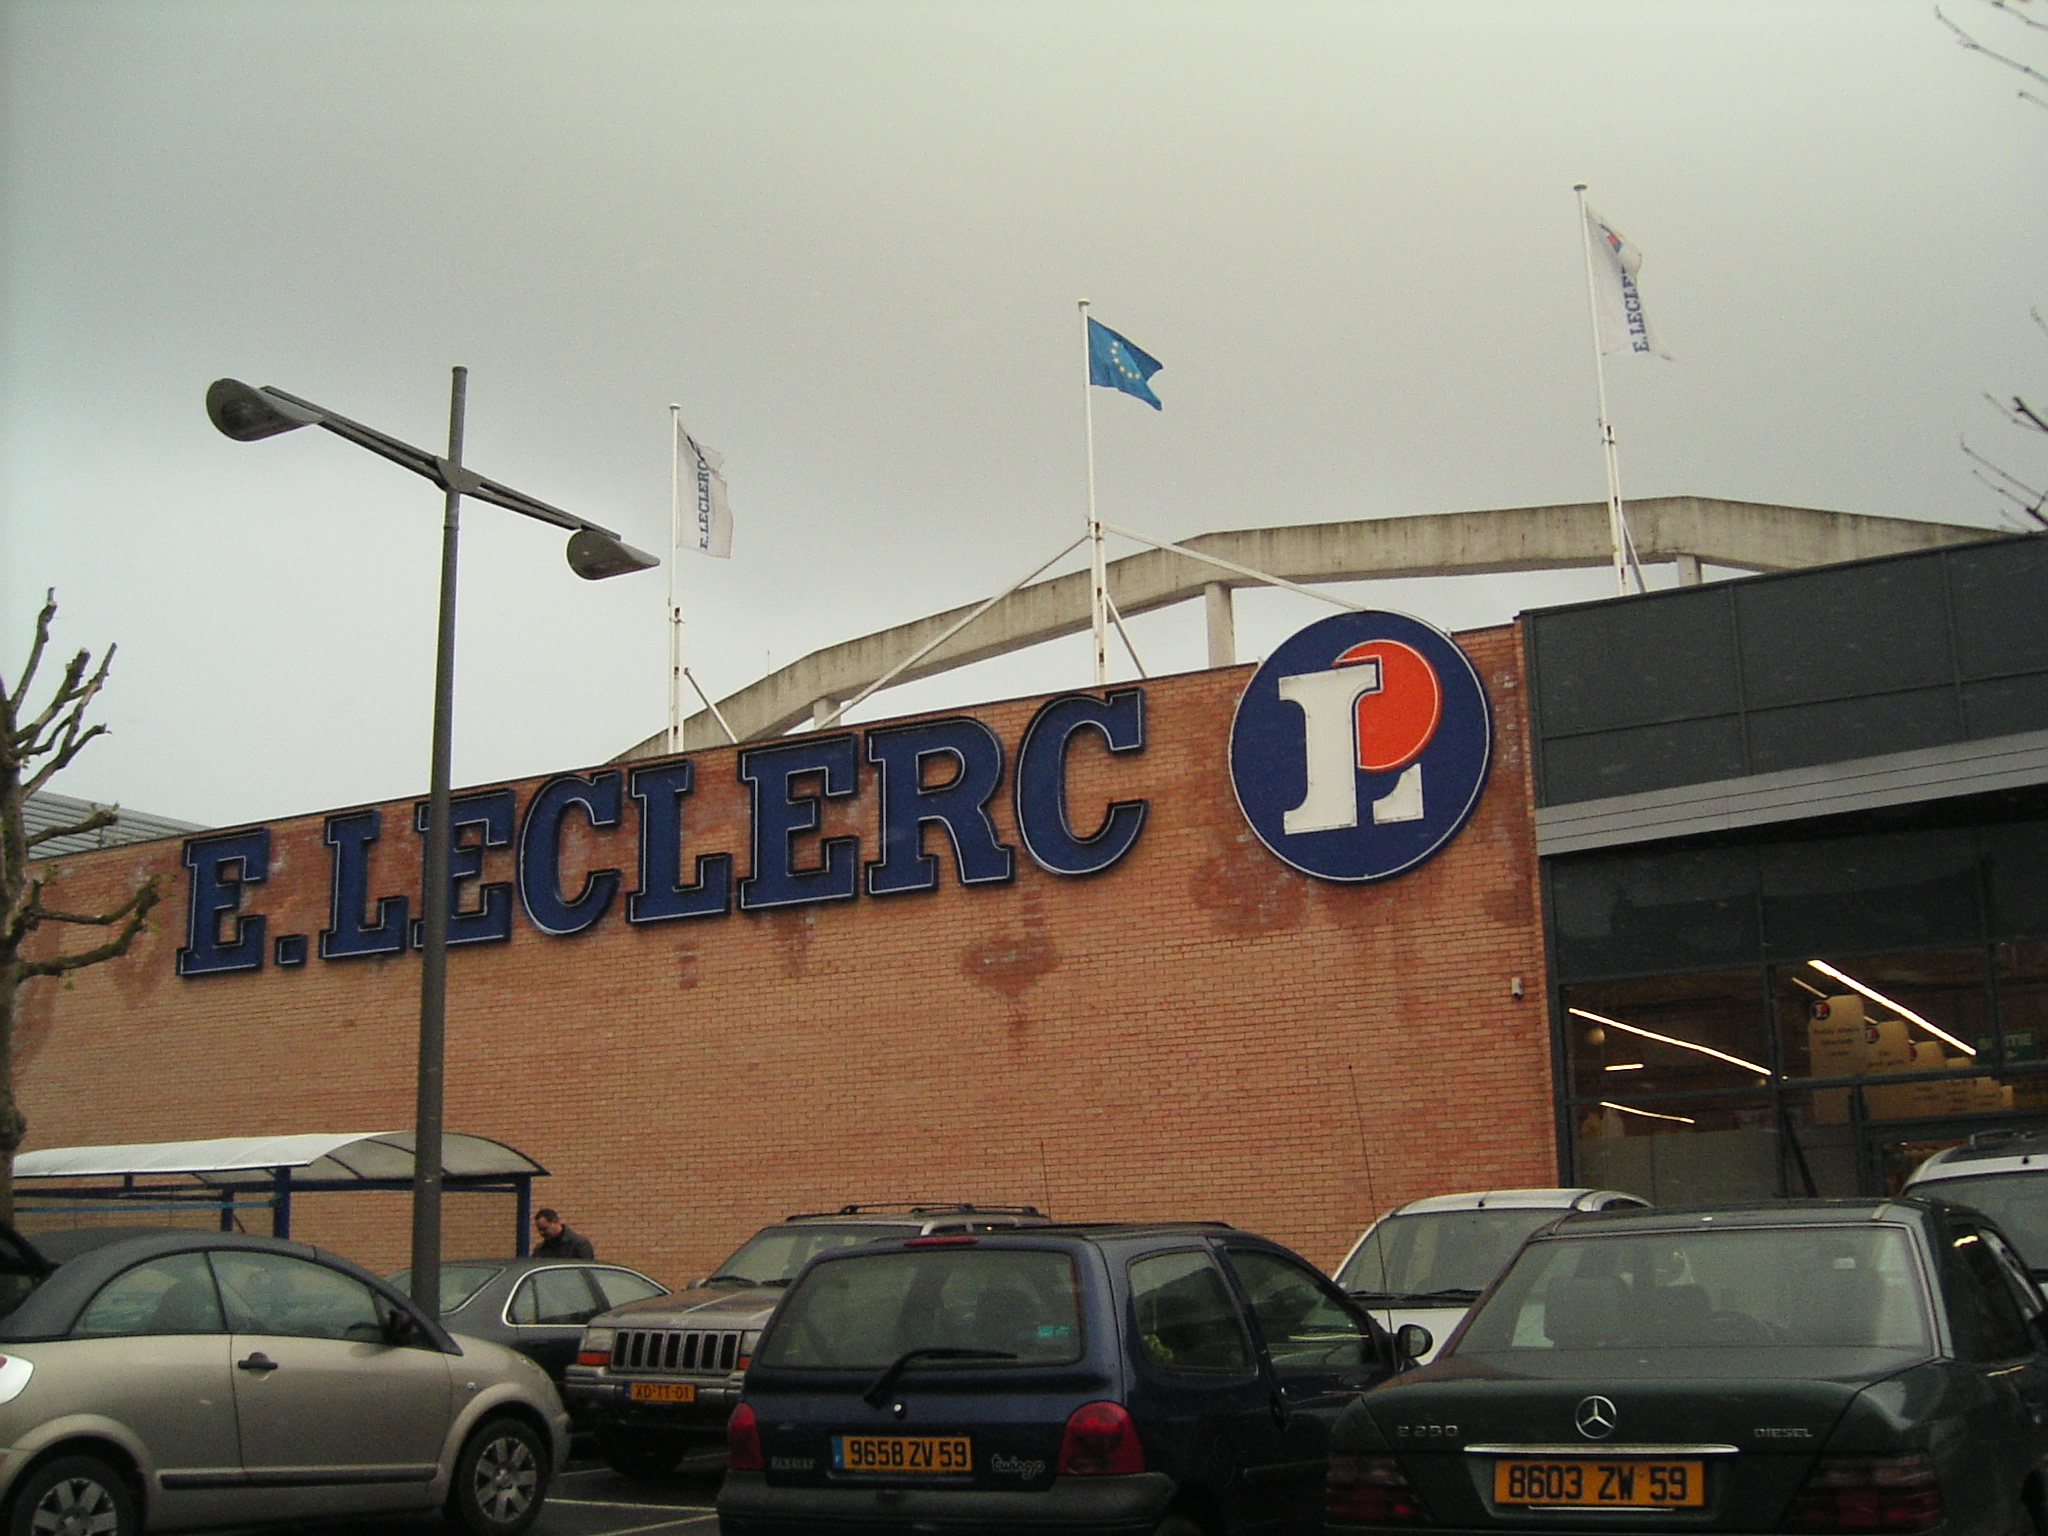 Retailers in France, E.Leclerc